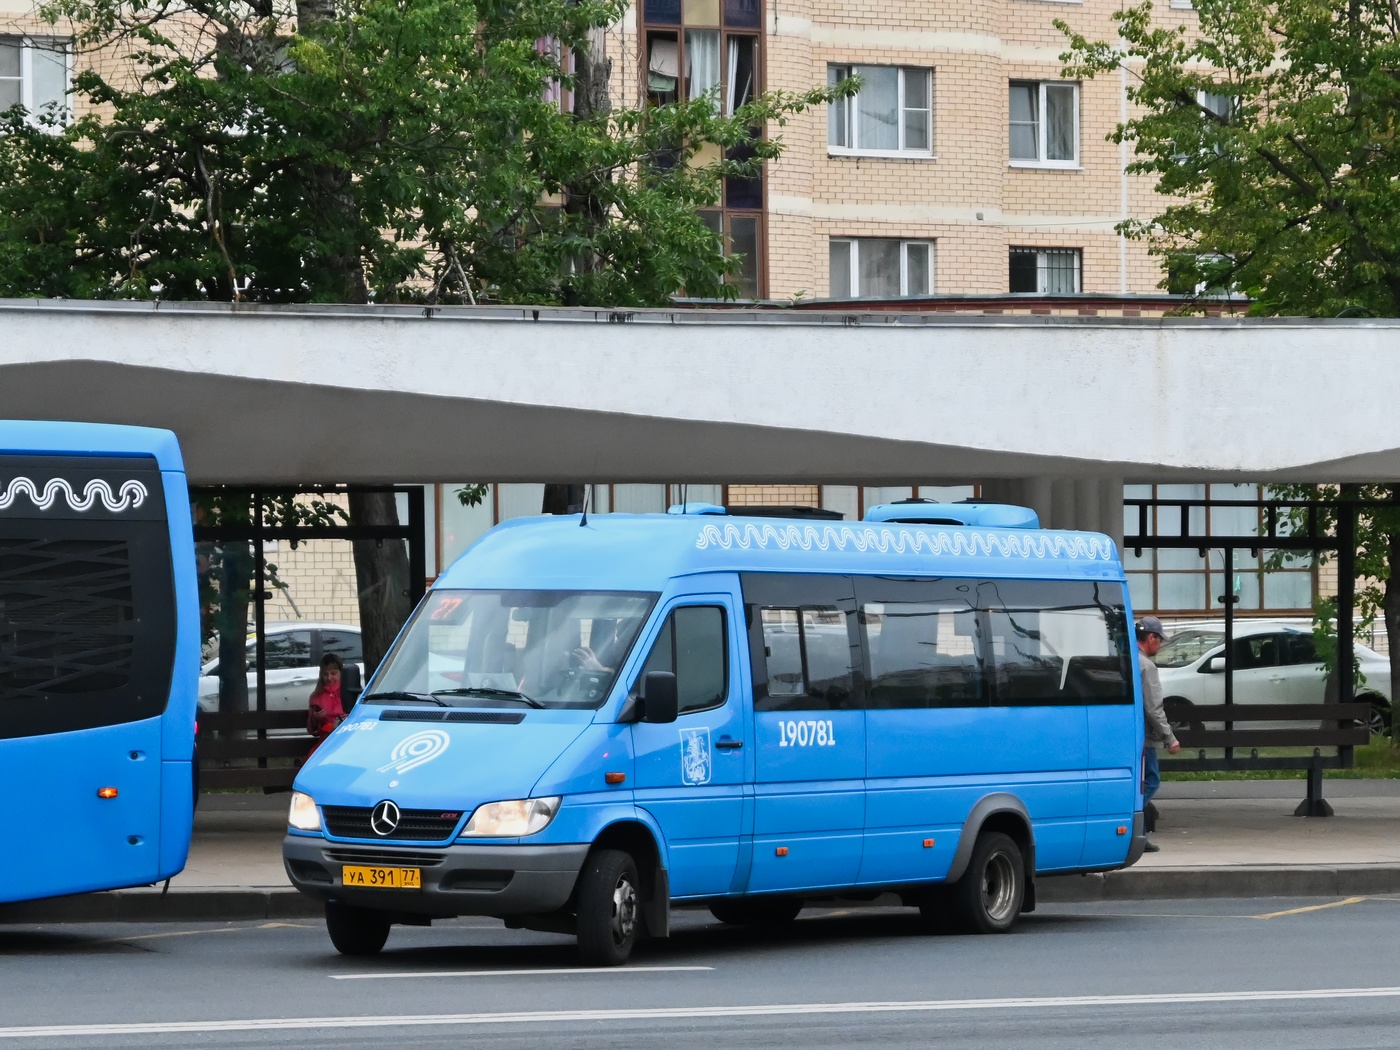 Moscow, Luidor-223206 (MB Sprinter Classic) # 190781